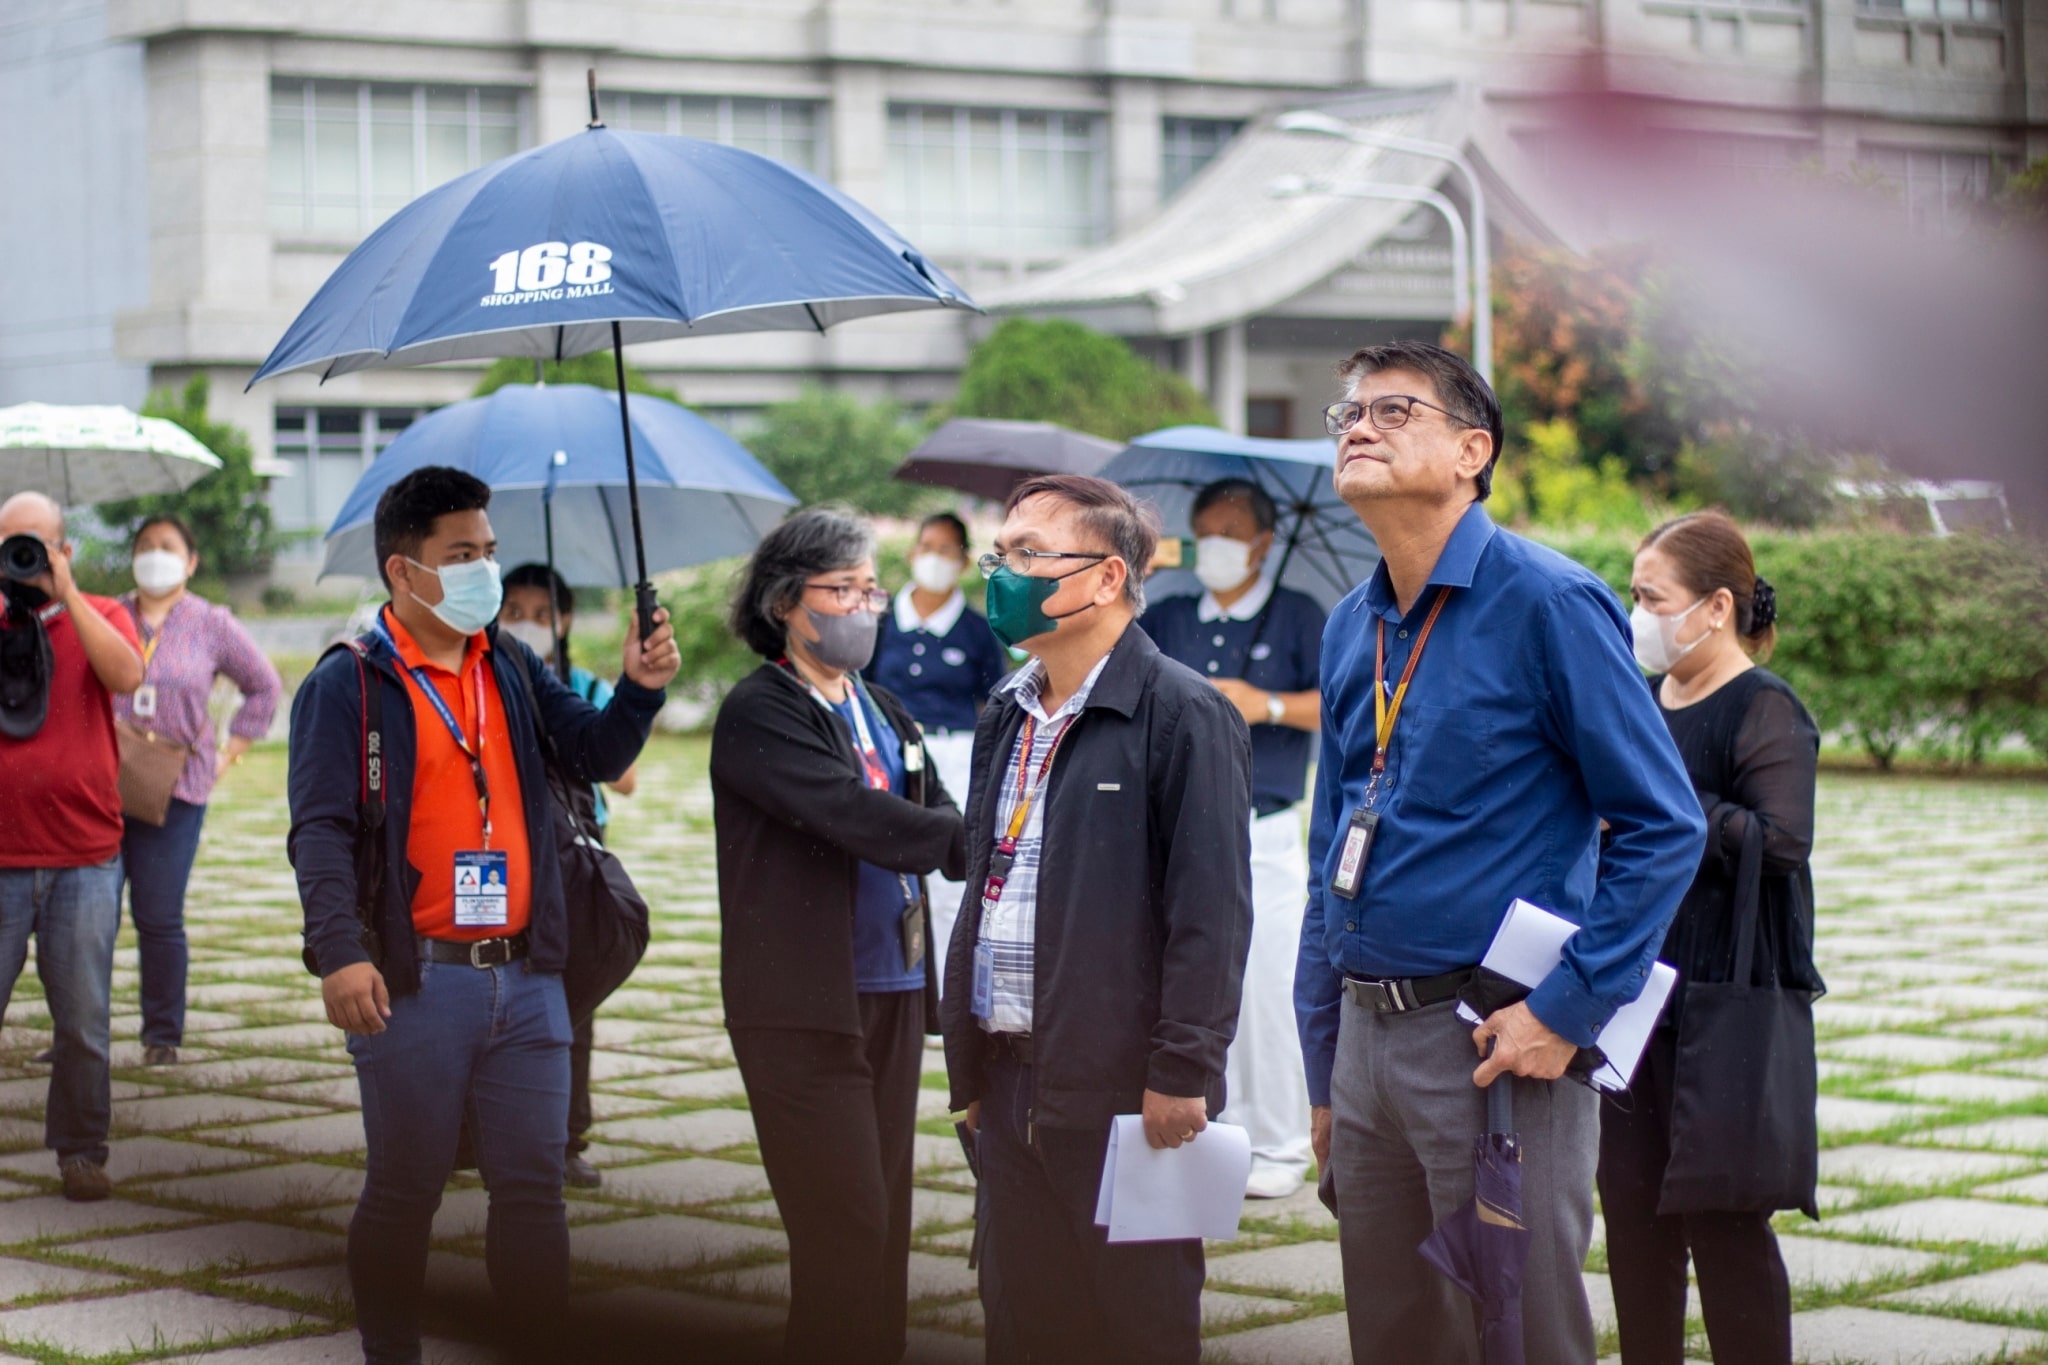 PUP officials are led on a tour of the Buddhist Tzu Chi Campus (BTCC) after the MOU signing, followed by a vegetarian lunch at the BTCC coffee shop. 【Photo by Harold Alzaga】